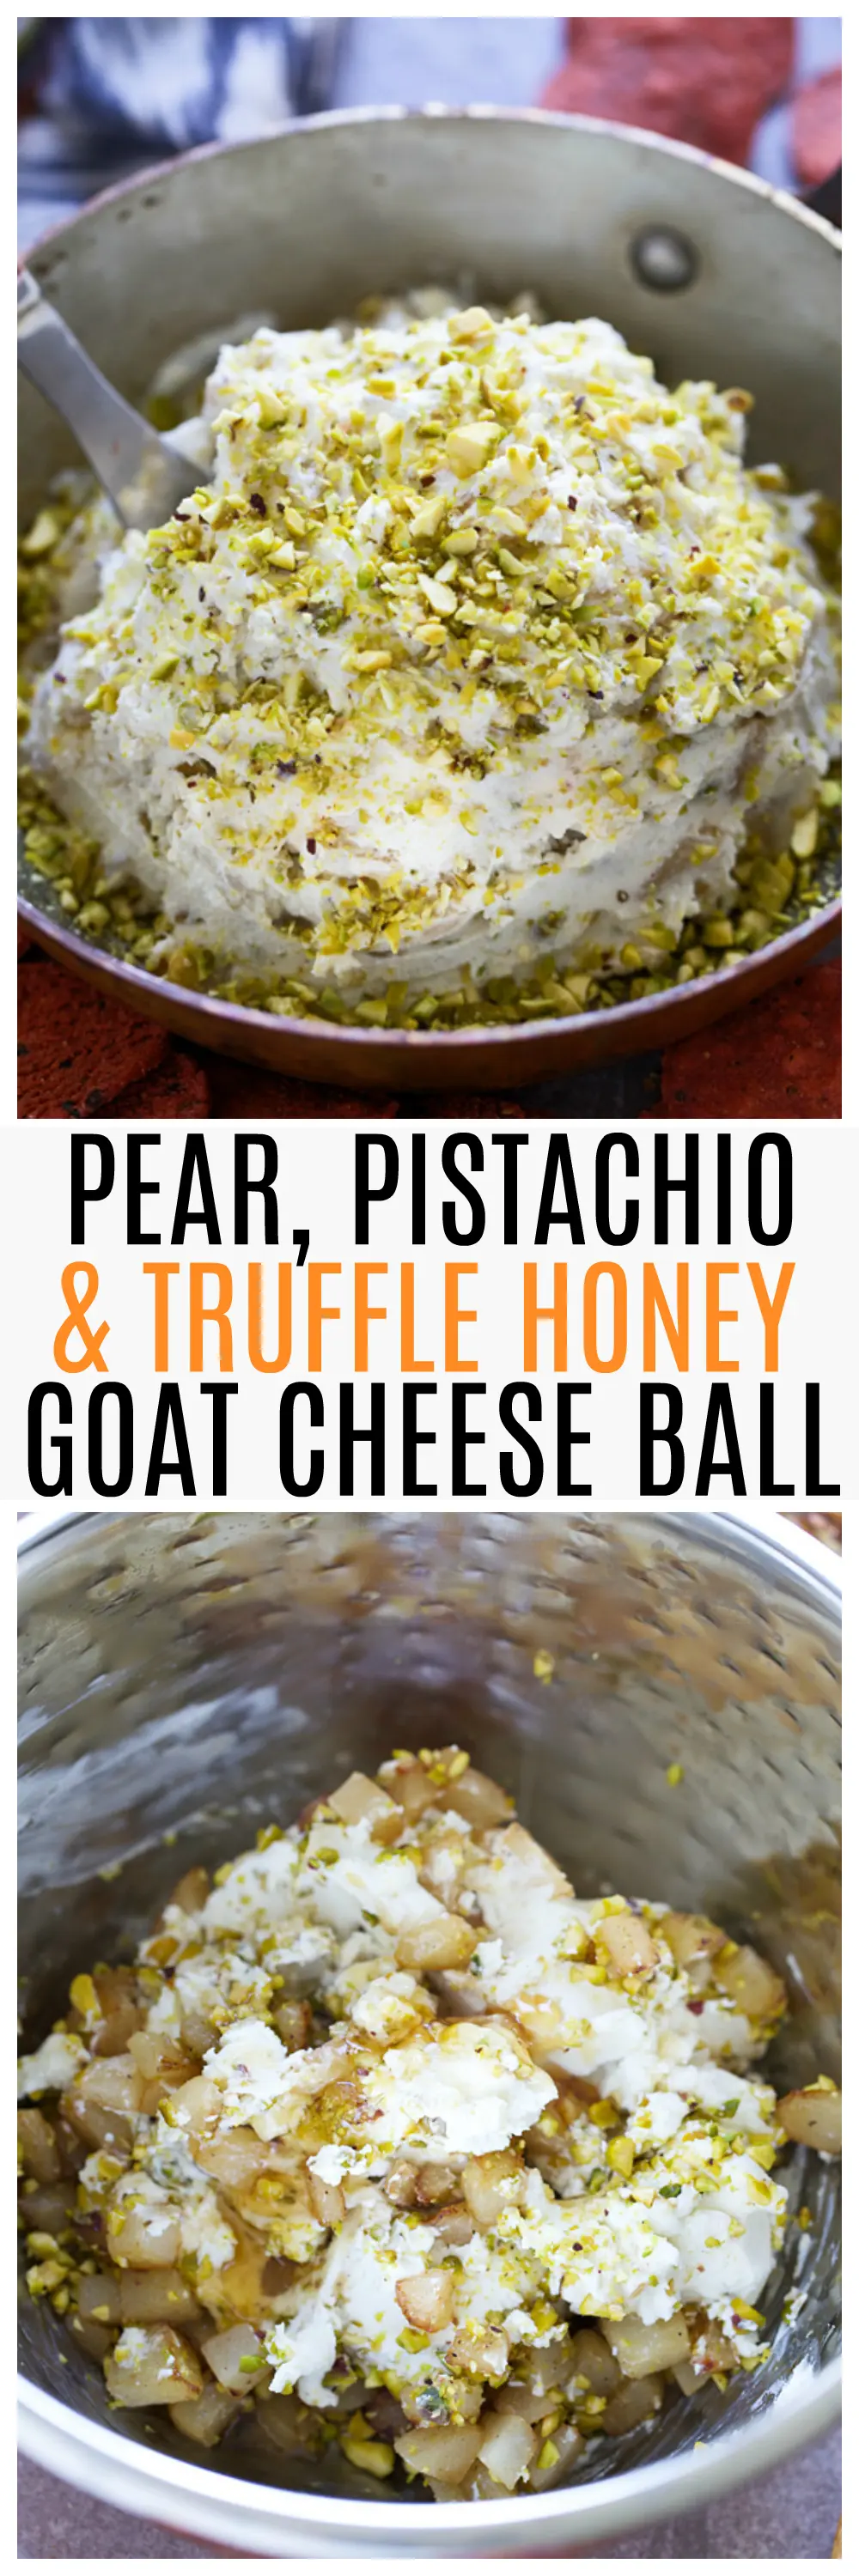 Pear, Pistachio and Truffle Honey Goat Cheese Ball